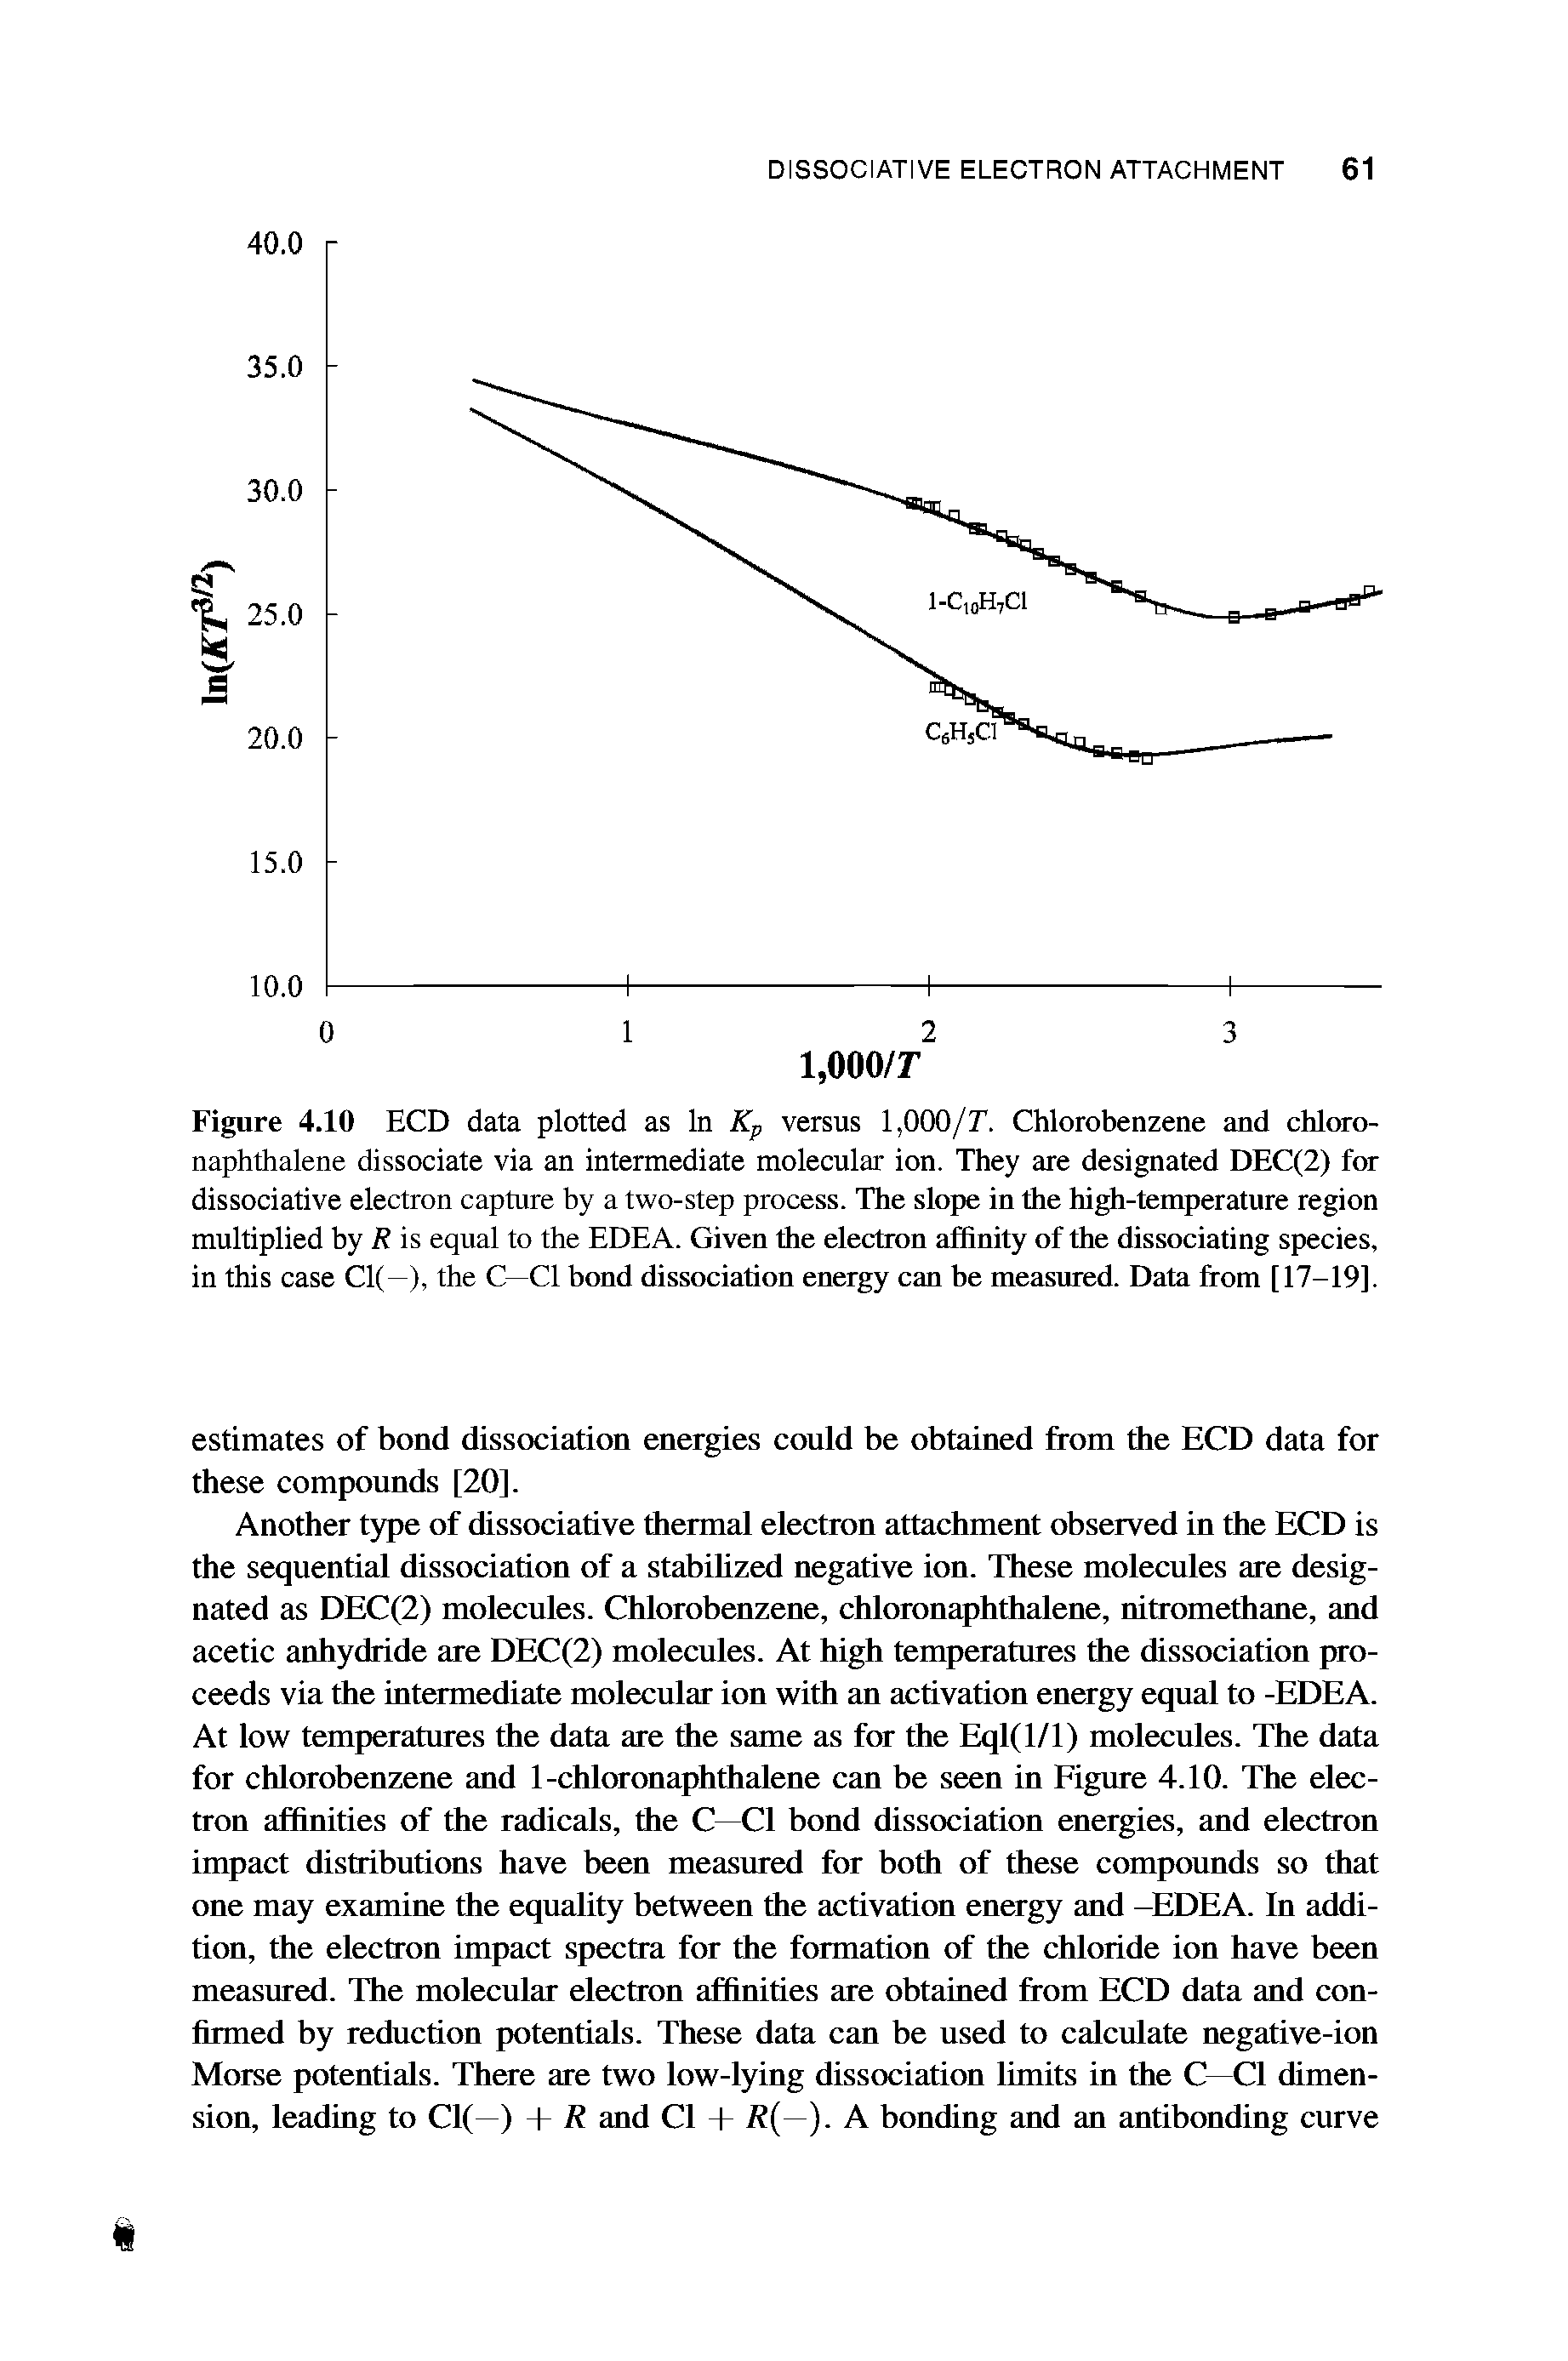 Figure 4.10 BCD data plotted as In Kp versus 1.000/7. Chlorobenzene and chloro-naphthalene dissociate via an intermediate molecular ion. They are designated DEC(2) for dissociative electron capture by a two-step process. The slope in the high-temperature region multiplied by R is equal to the EDEA. Given the electron affinity of the dissociating species, in this case Cl(—), the C—Cl bond dissociation energy can be measured. Data from [17-19].